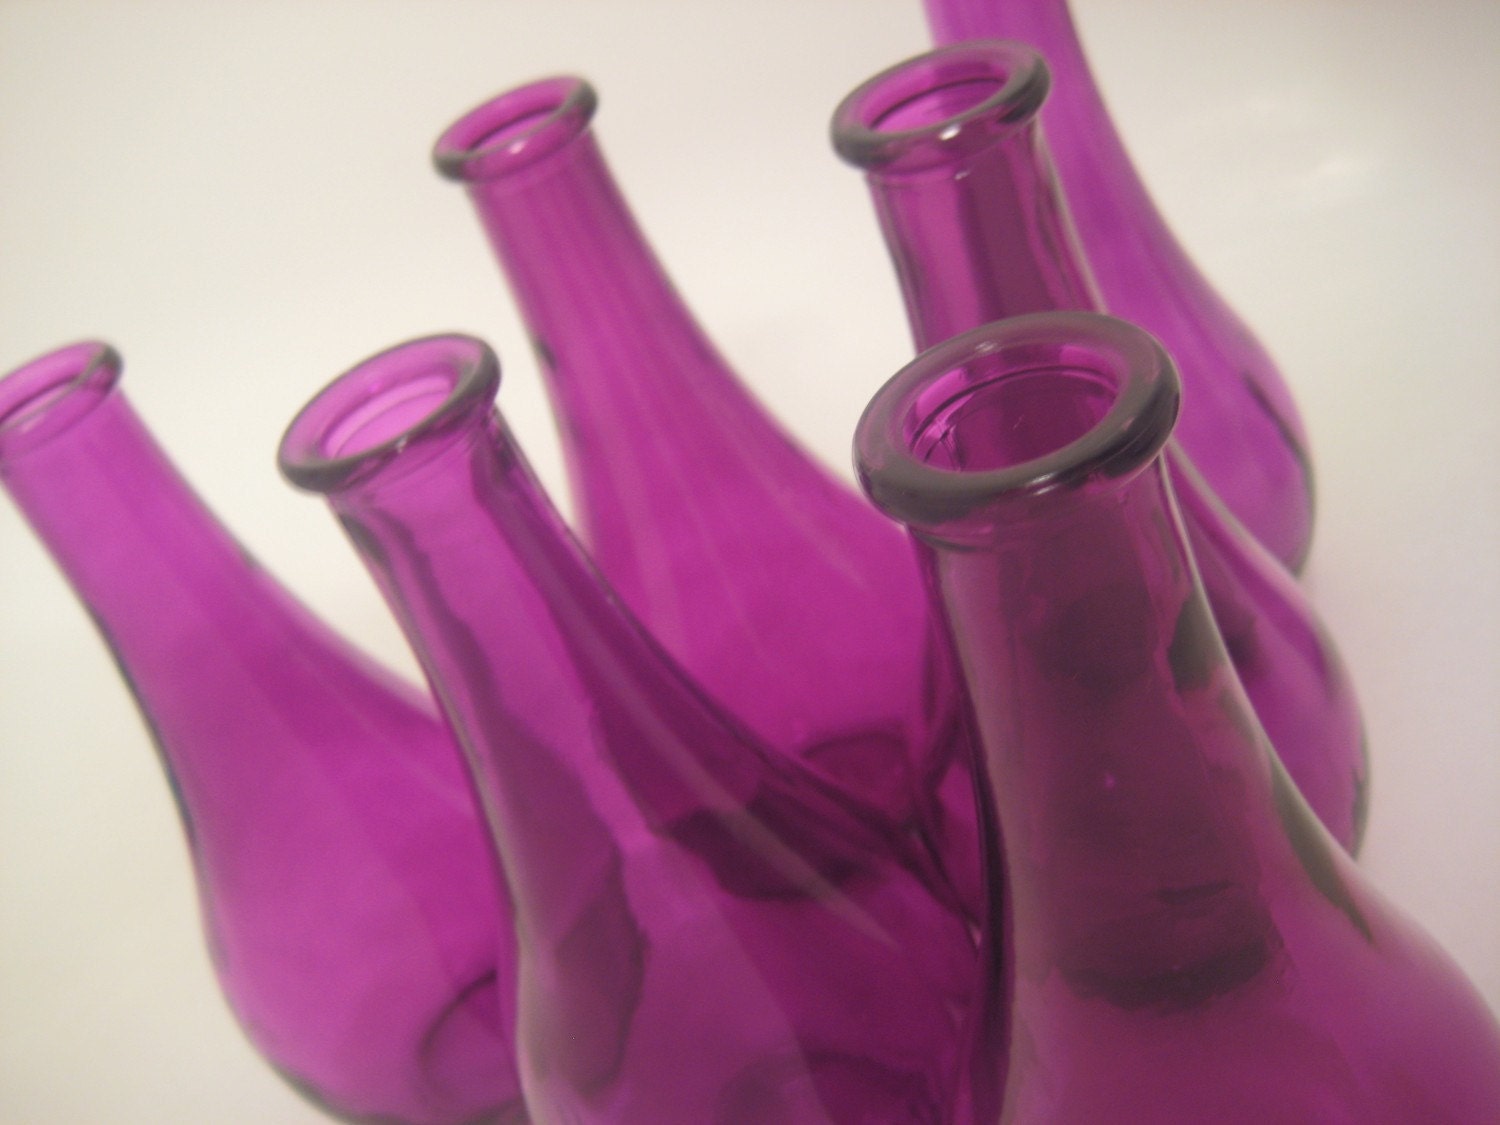 PURPLE GLASS BOTTLES VASES Colorful Moroccan Indian Decor